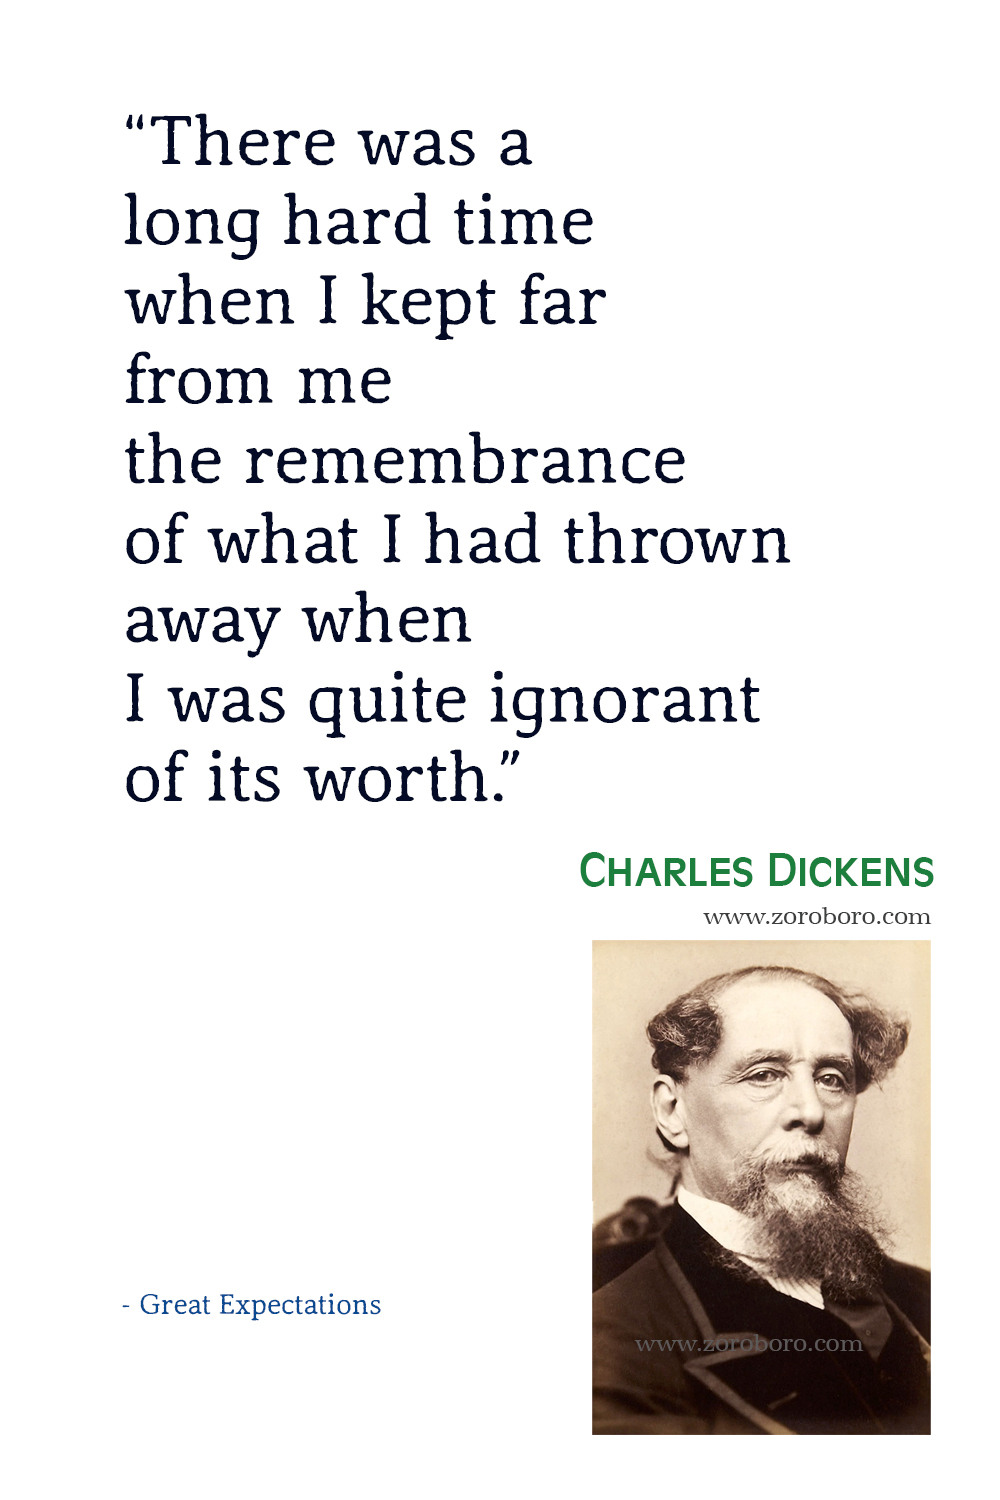 Charles Dickens Quotes, Charles Dickens A Tale of Two Cities Quotes, Charles Dickens Books Quotes, Charles Dickens Great Expectations Quotes